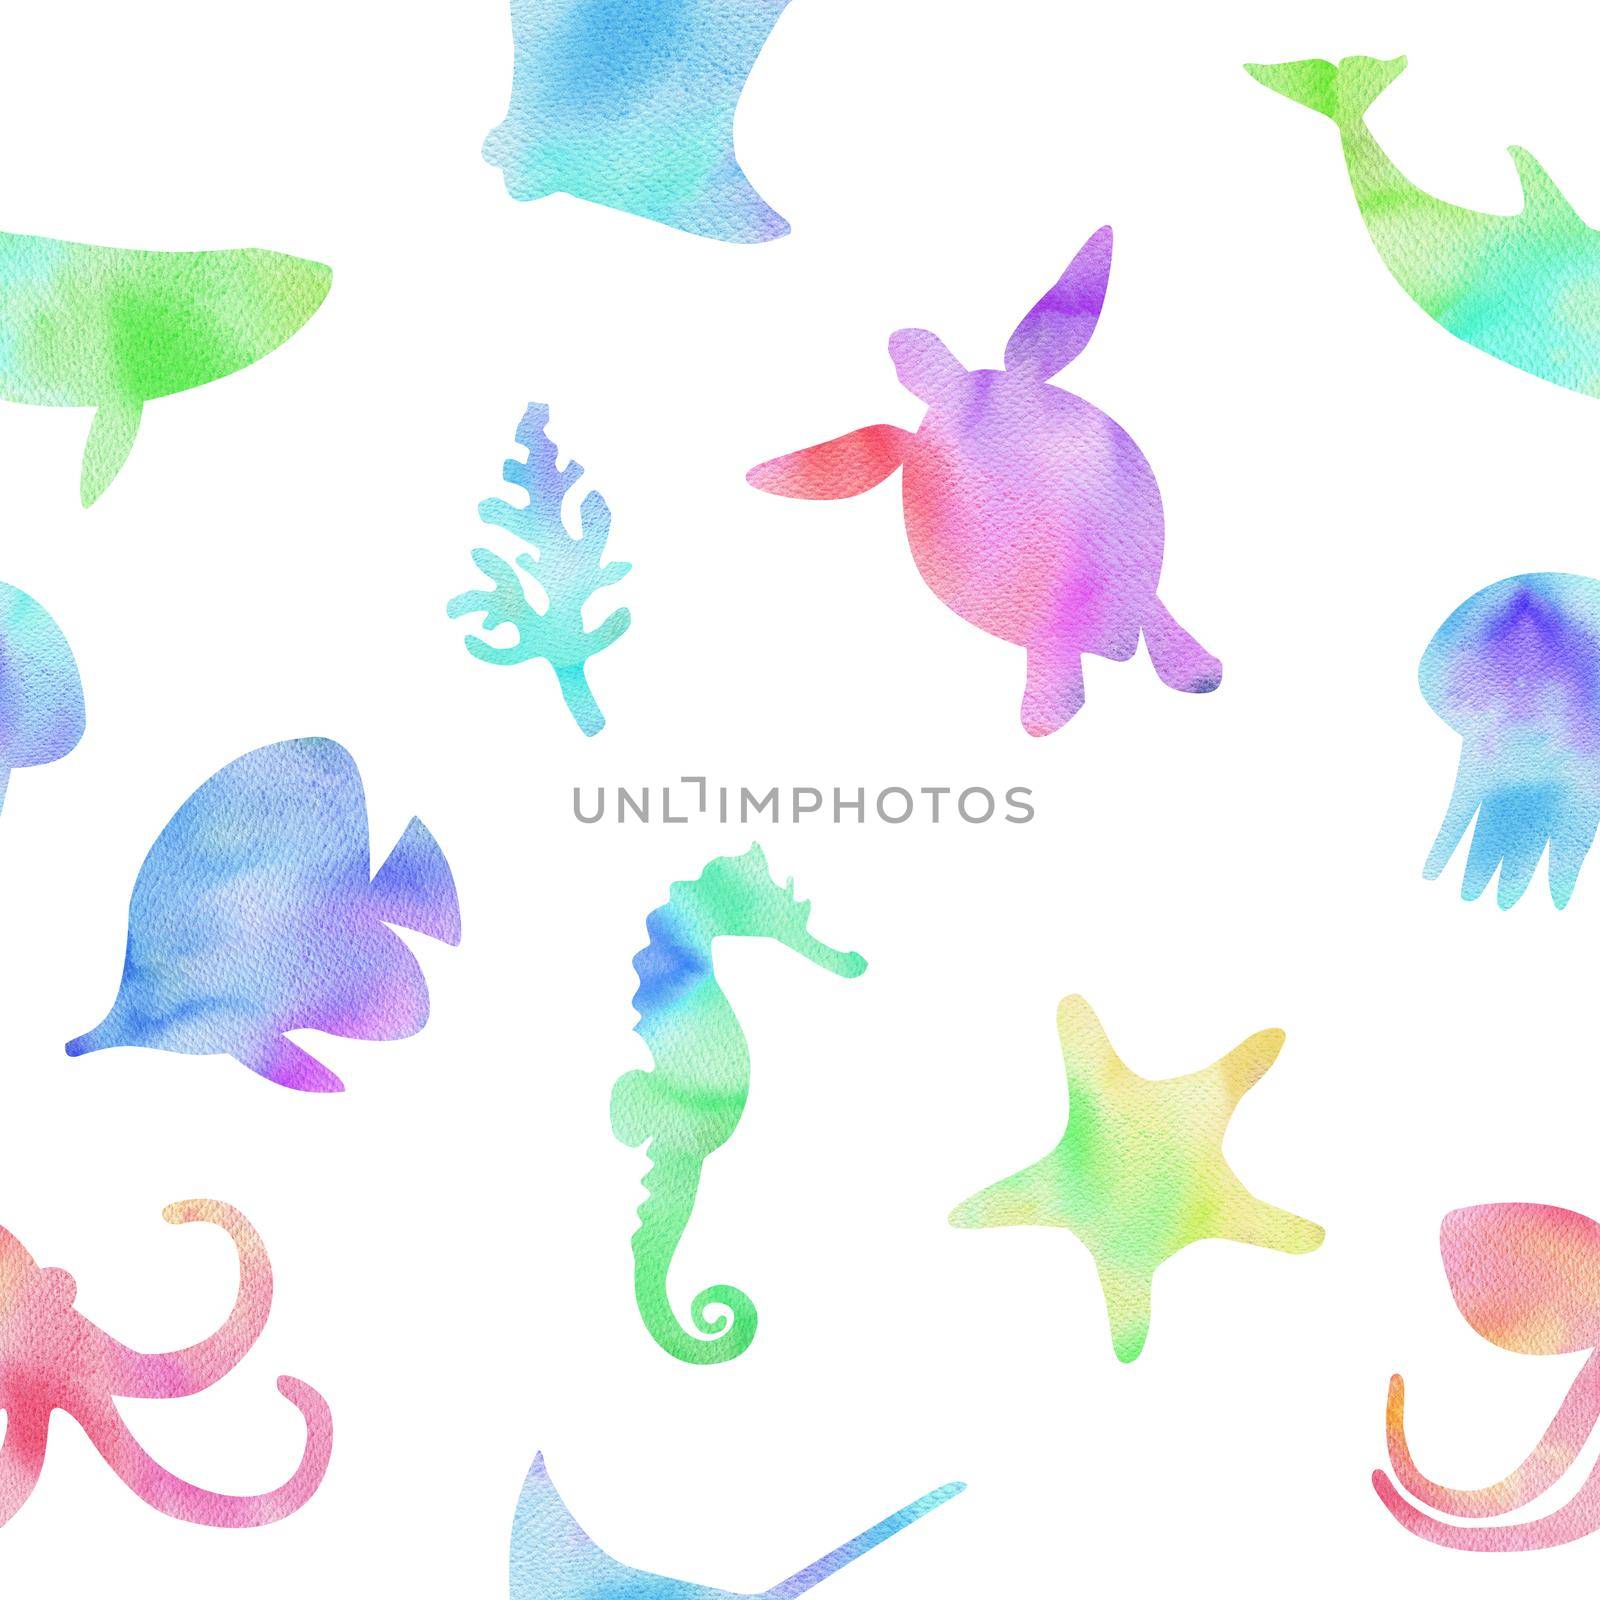 watercolor underwater color fishes and animals shapes seamless pattern on white background for fabric,wrapping. World oceans day. Sea life. by dreamloud